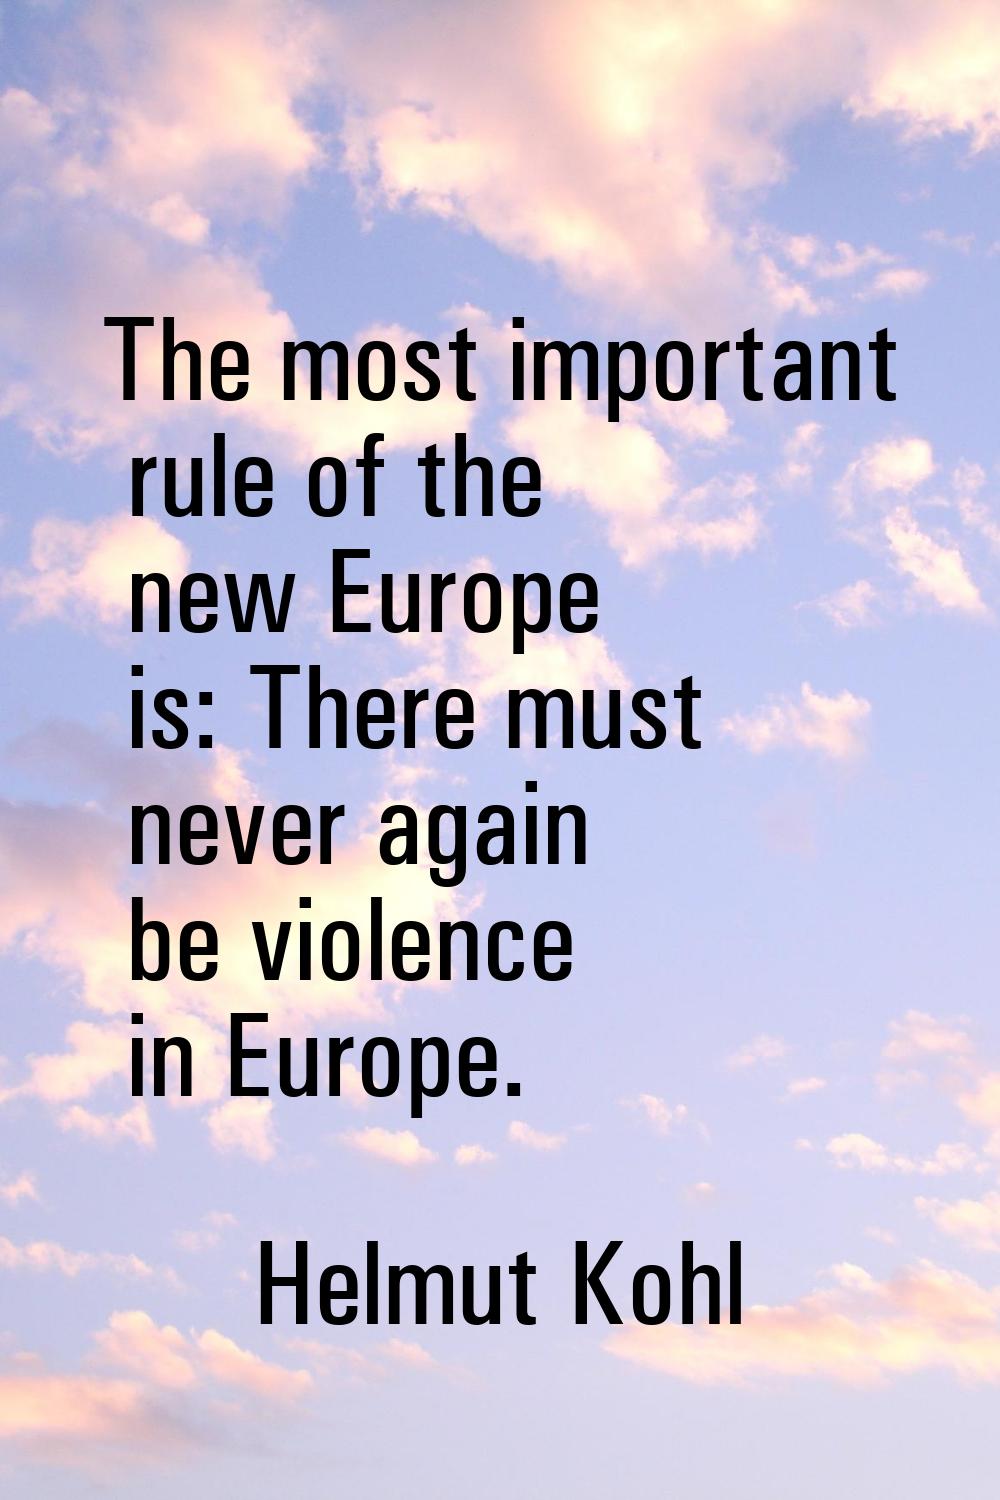 The most important rule of the new Europe is: There must never again be violence in Europe.